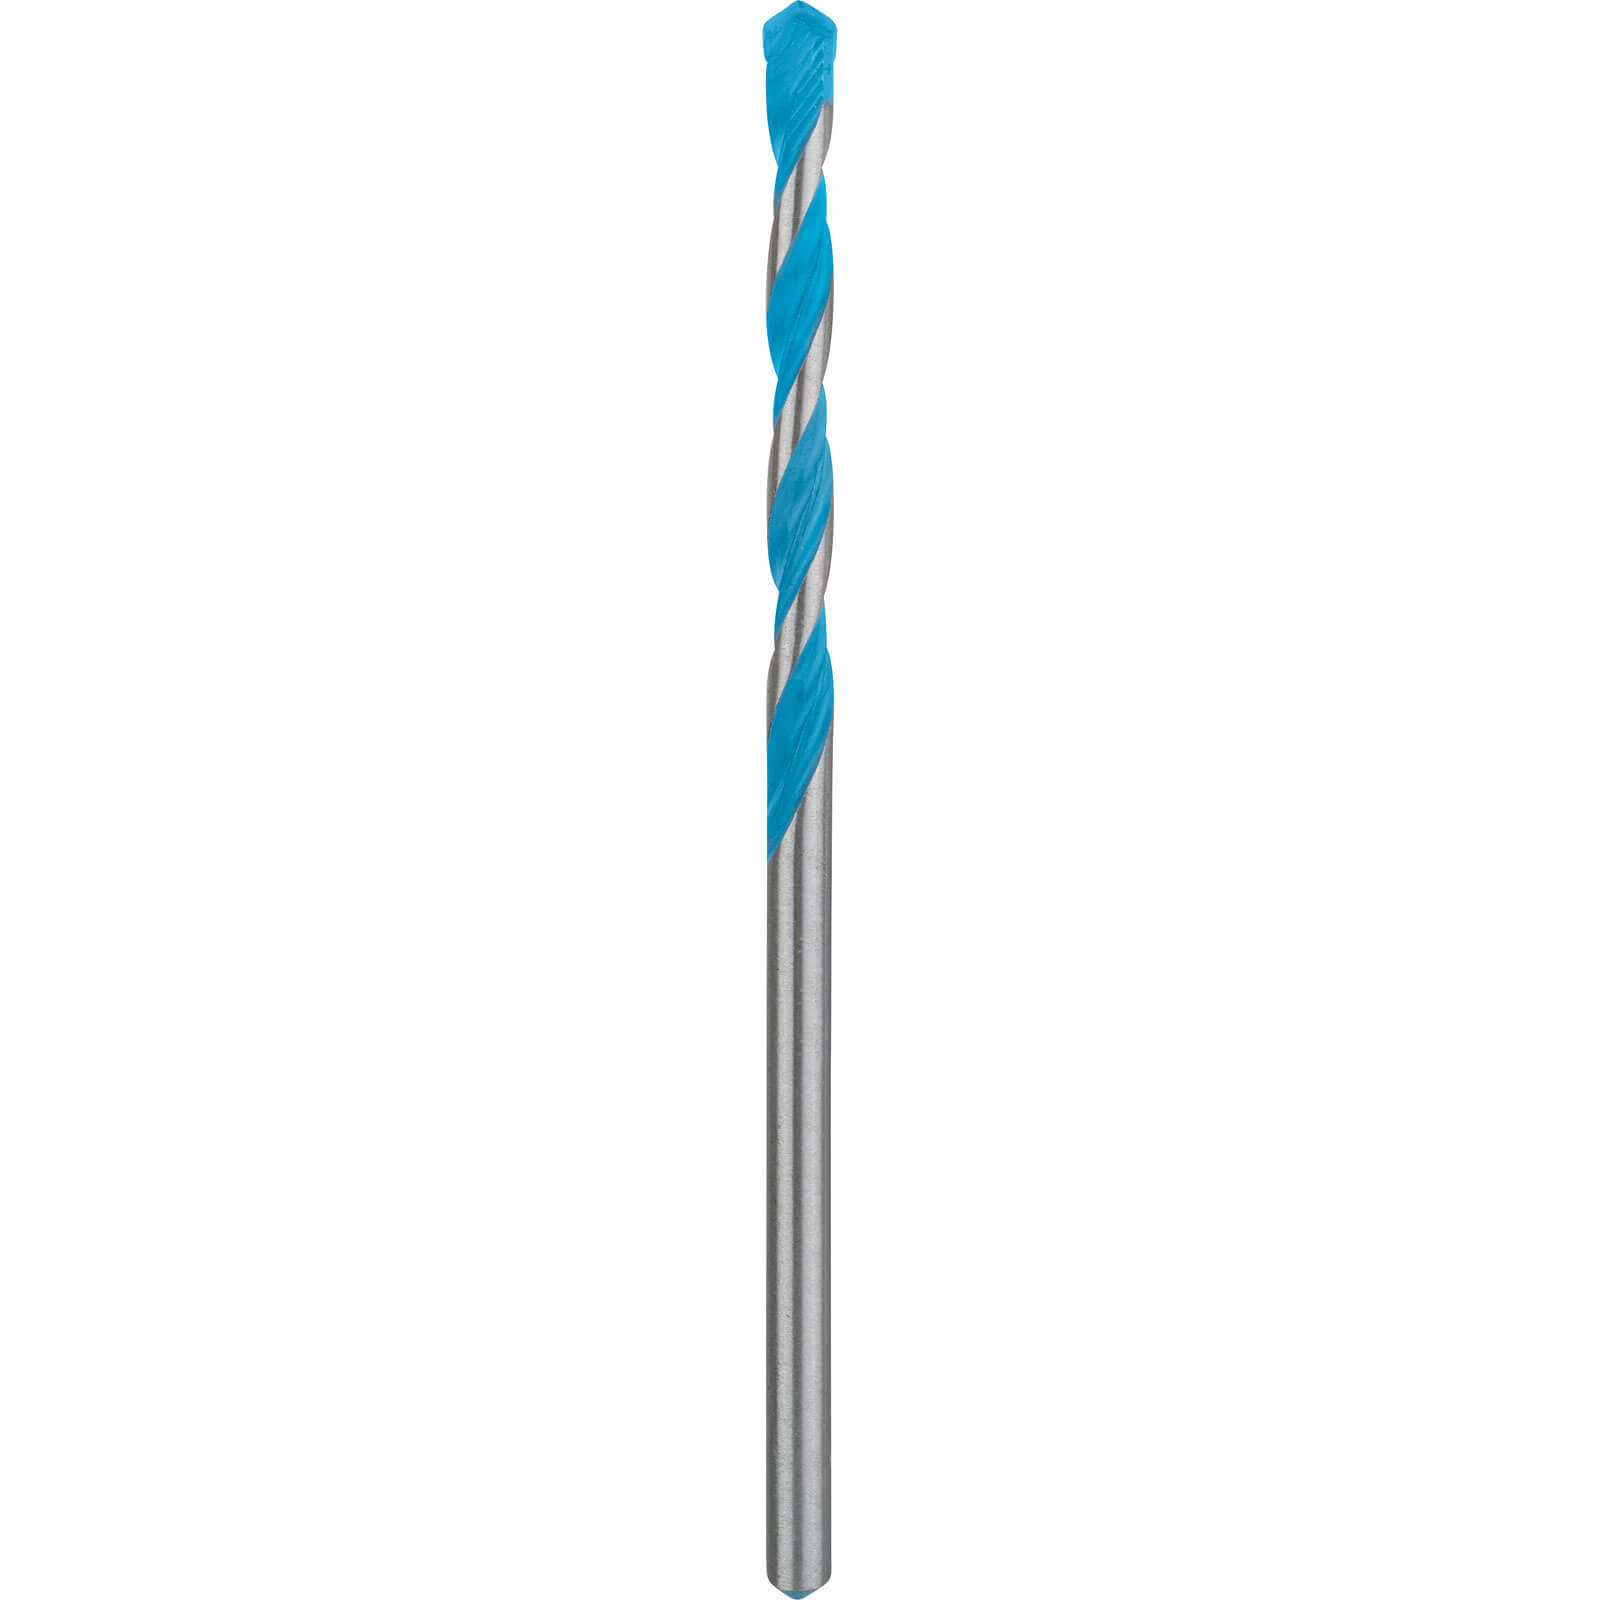 Image of Bosch Expert CYL-9 Multi Construction Drill Bit 7mm 150mm Pack of 1